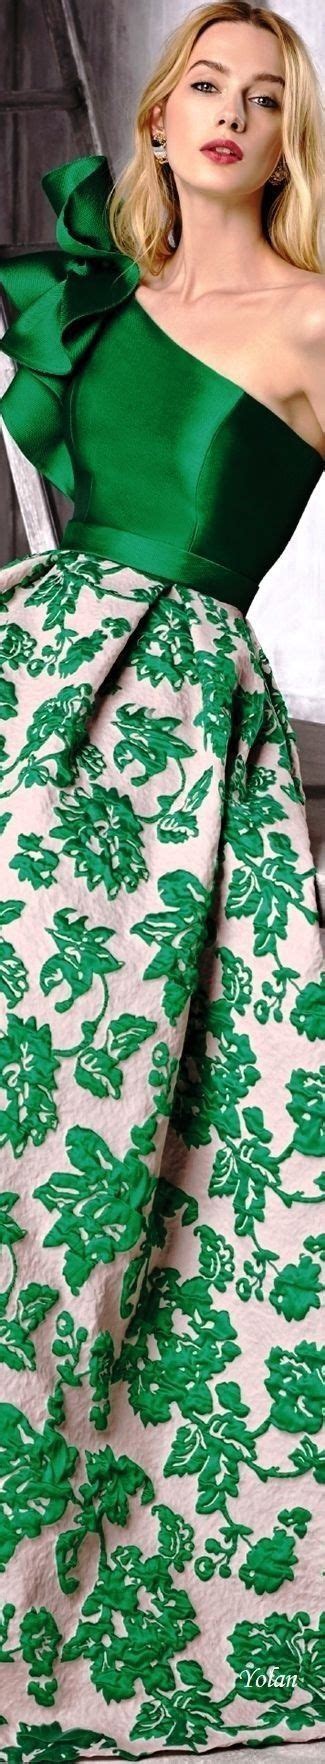 Floral Fashion Green Fashion Evening Wear Evening Dresses Gowns